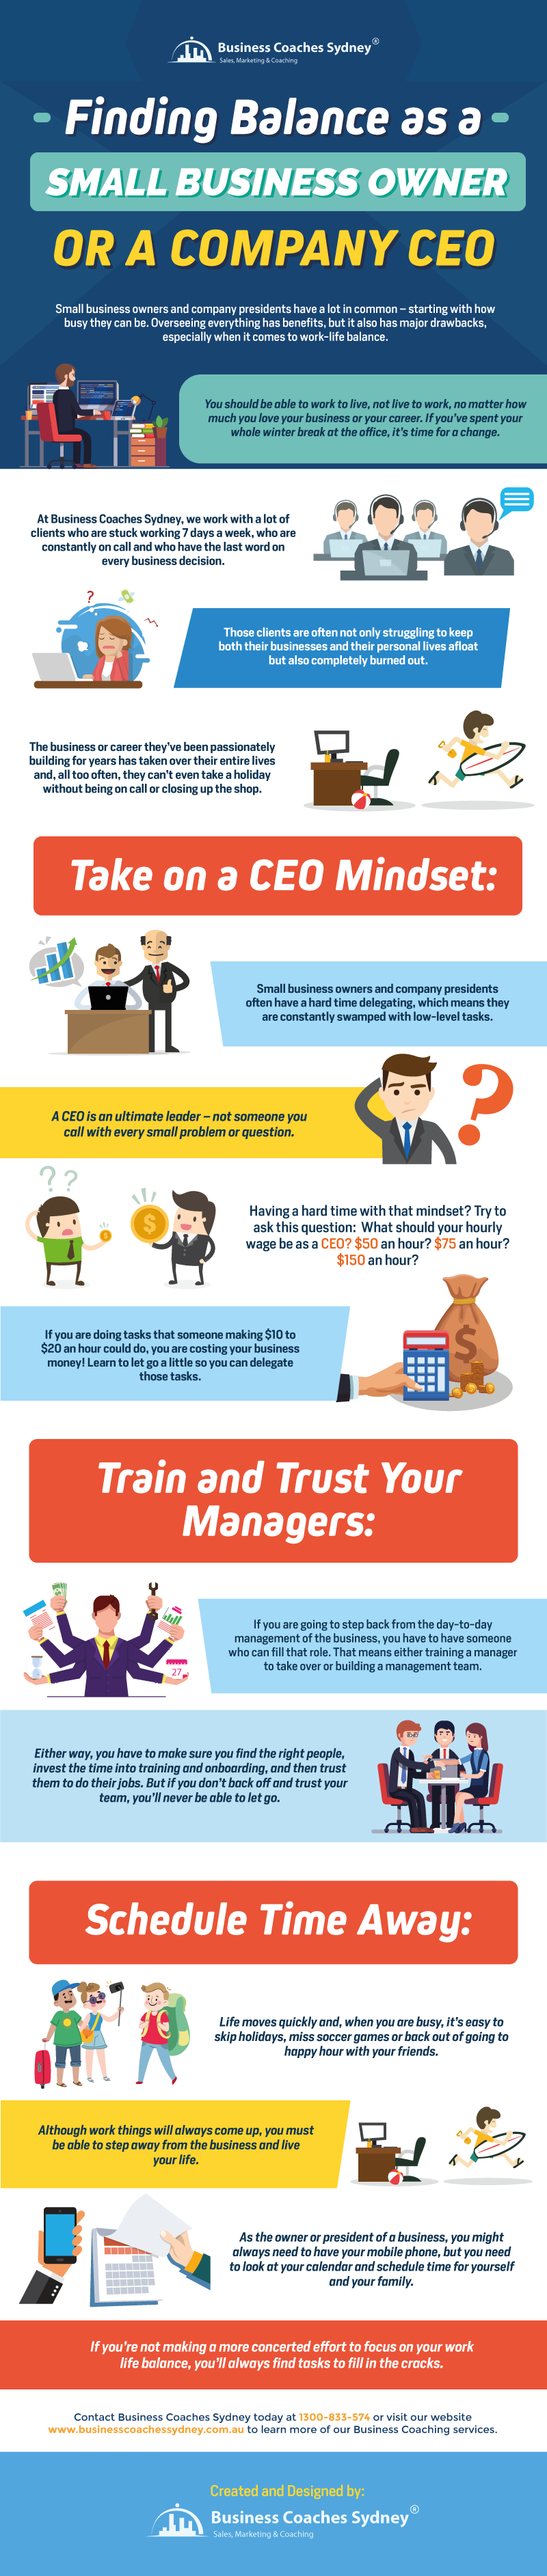 Finding Balance as a Small Business Owner or a Company CEO #Infographic